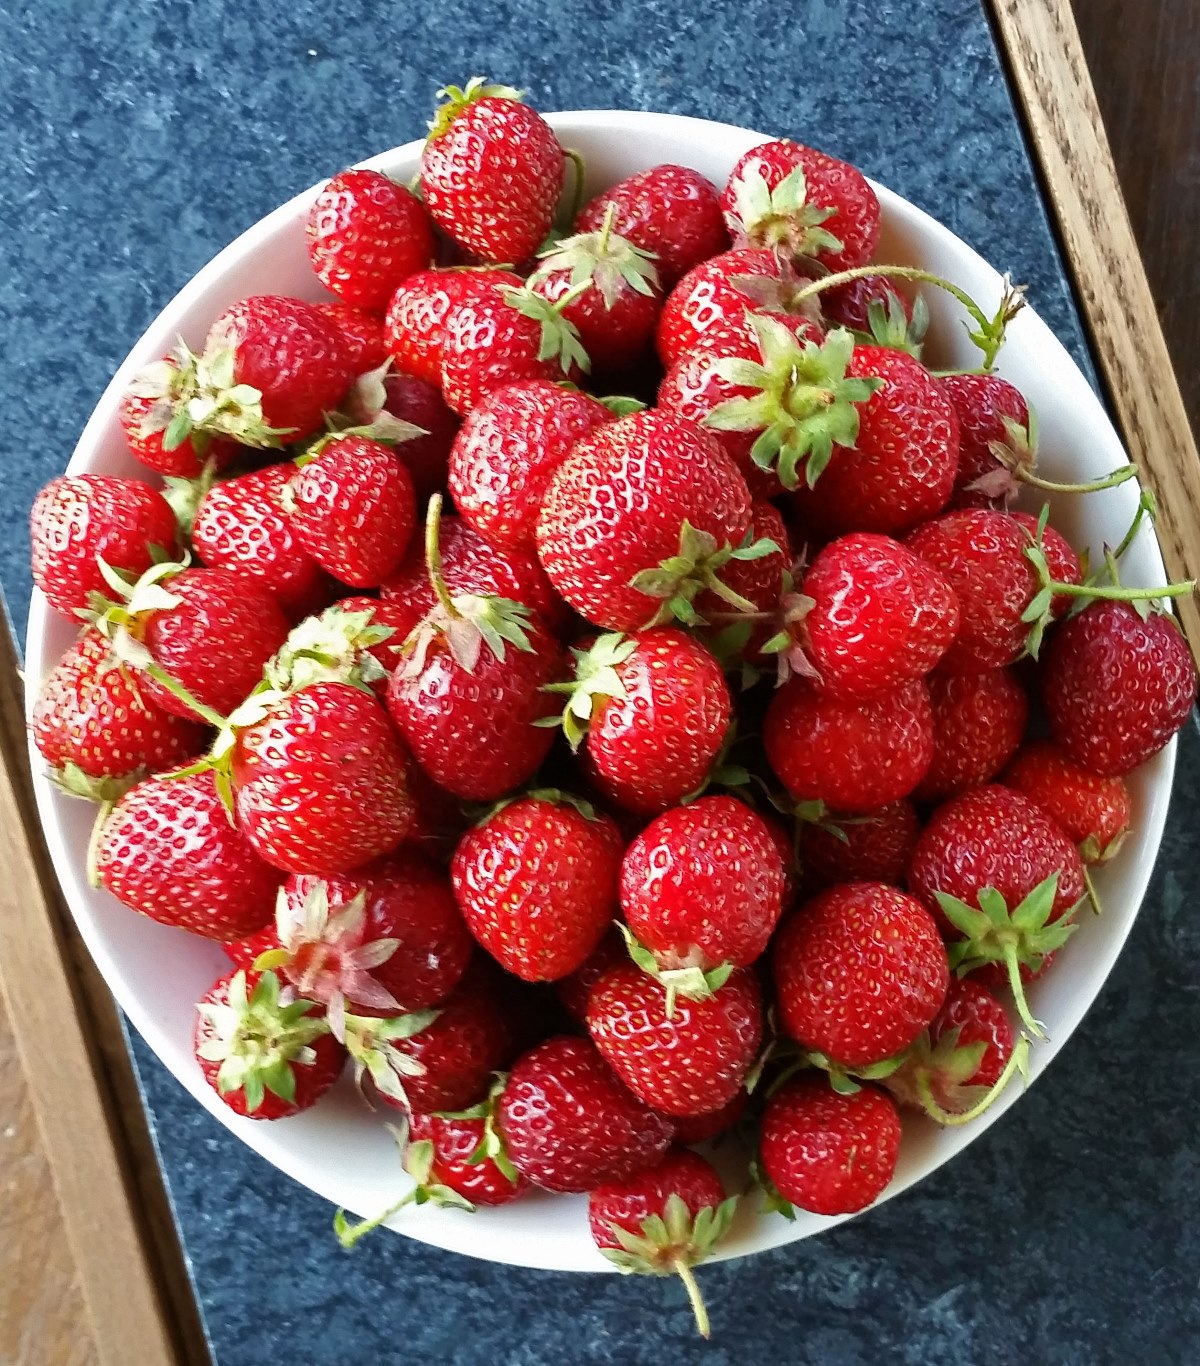 Strawberries in a white bowl on a gray backbround